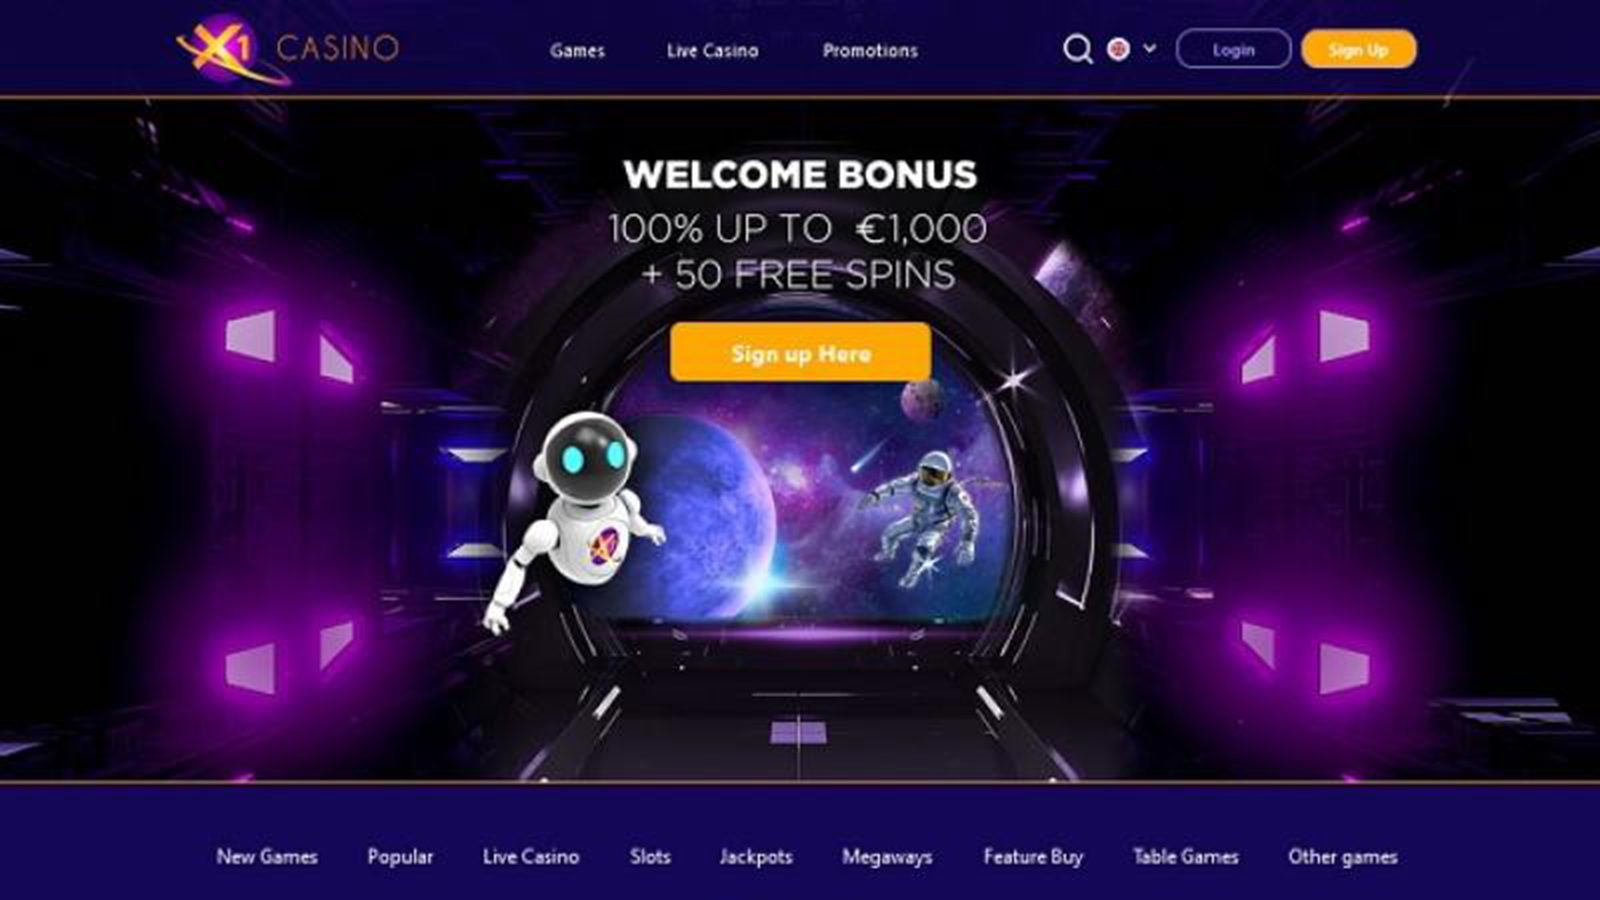 In-Depth Review of X1 Casino